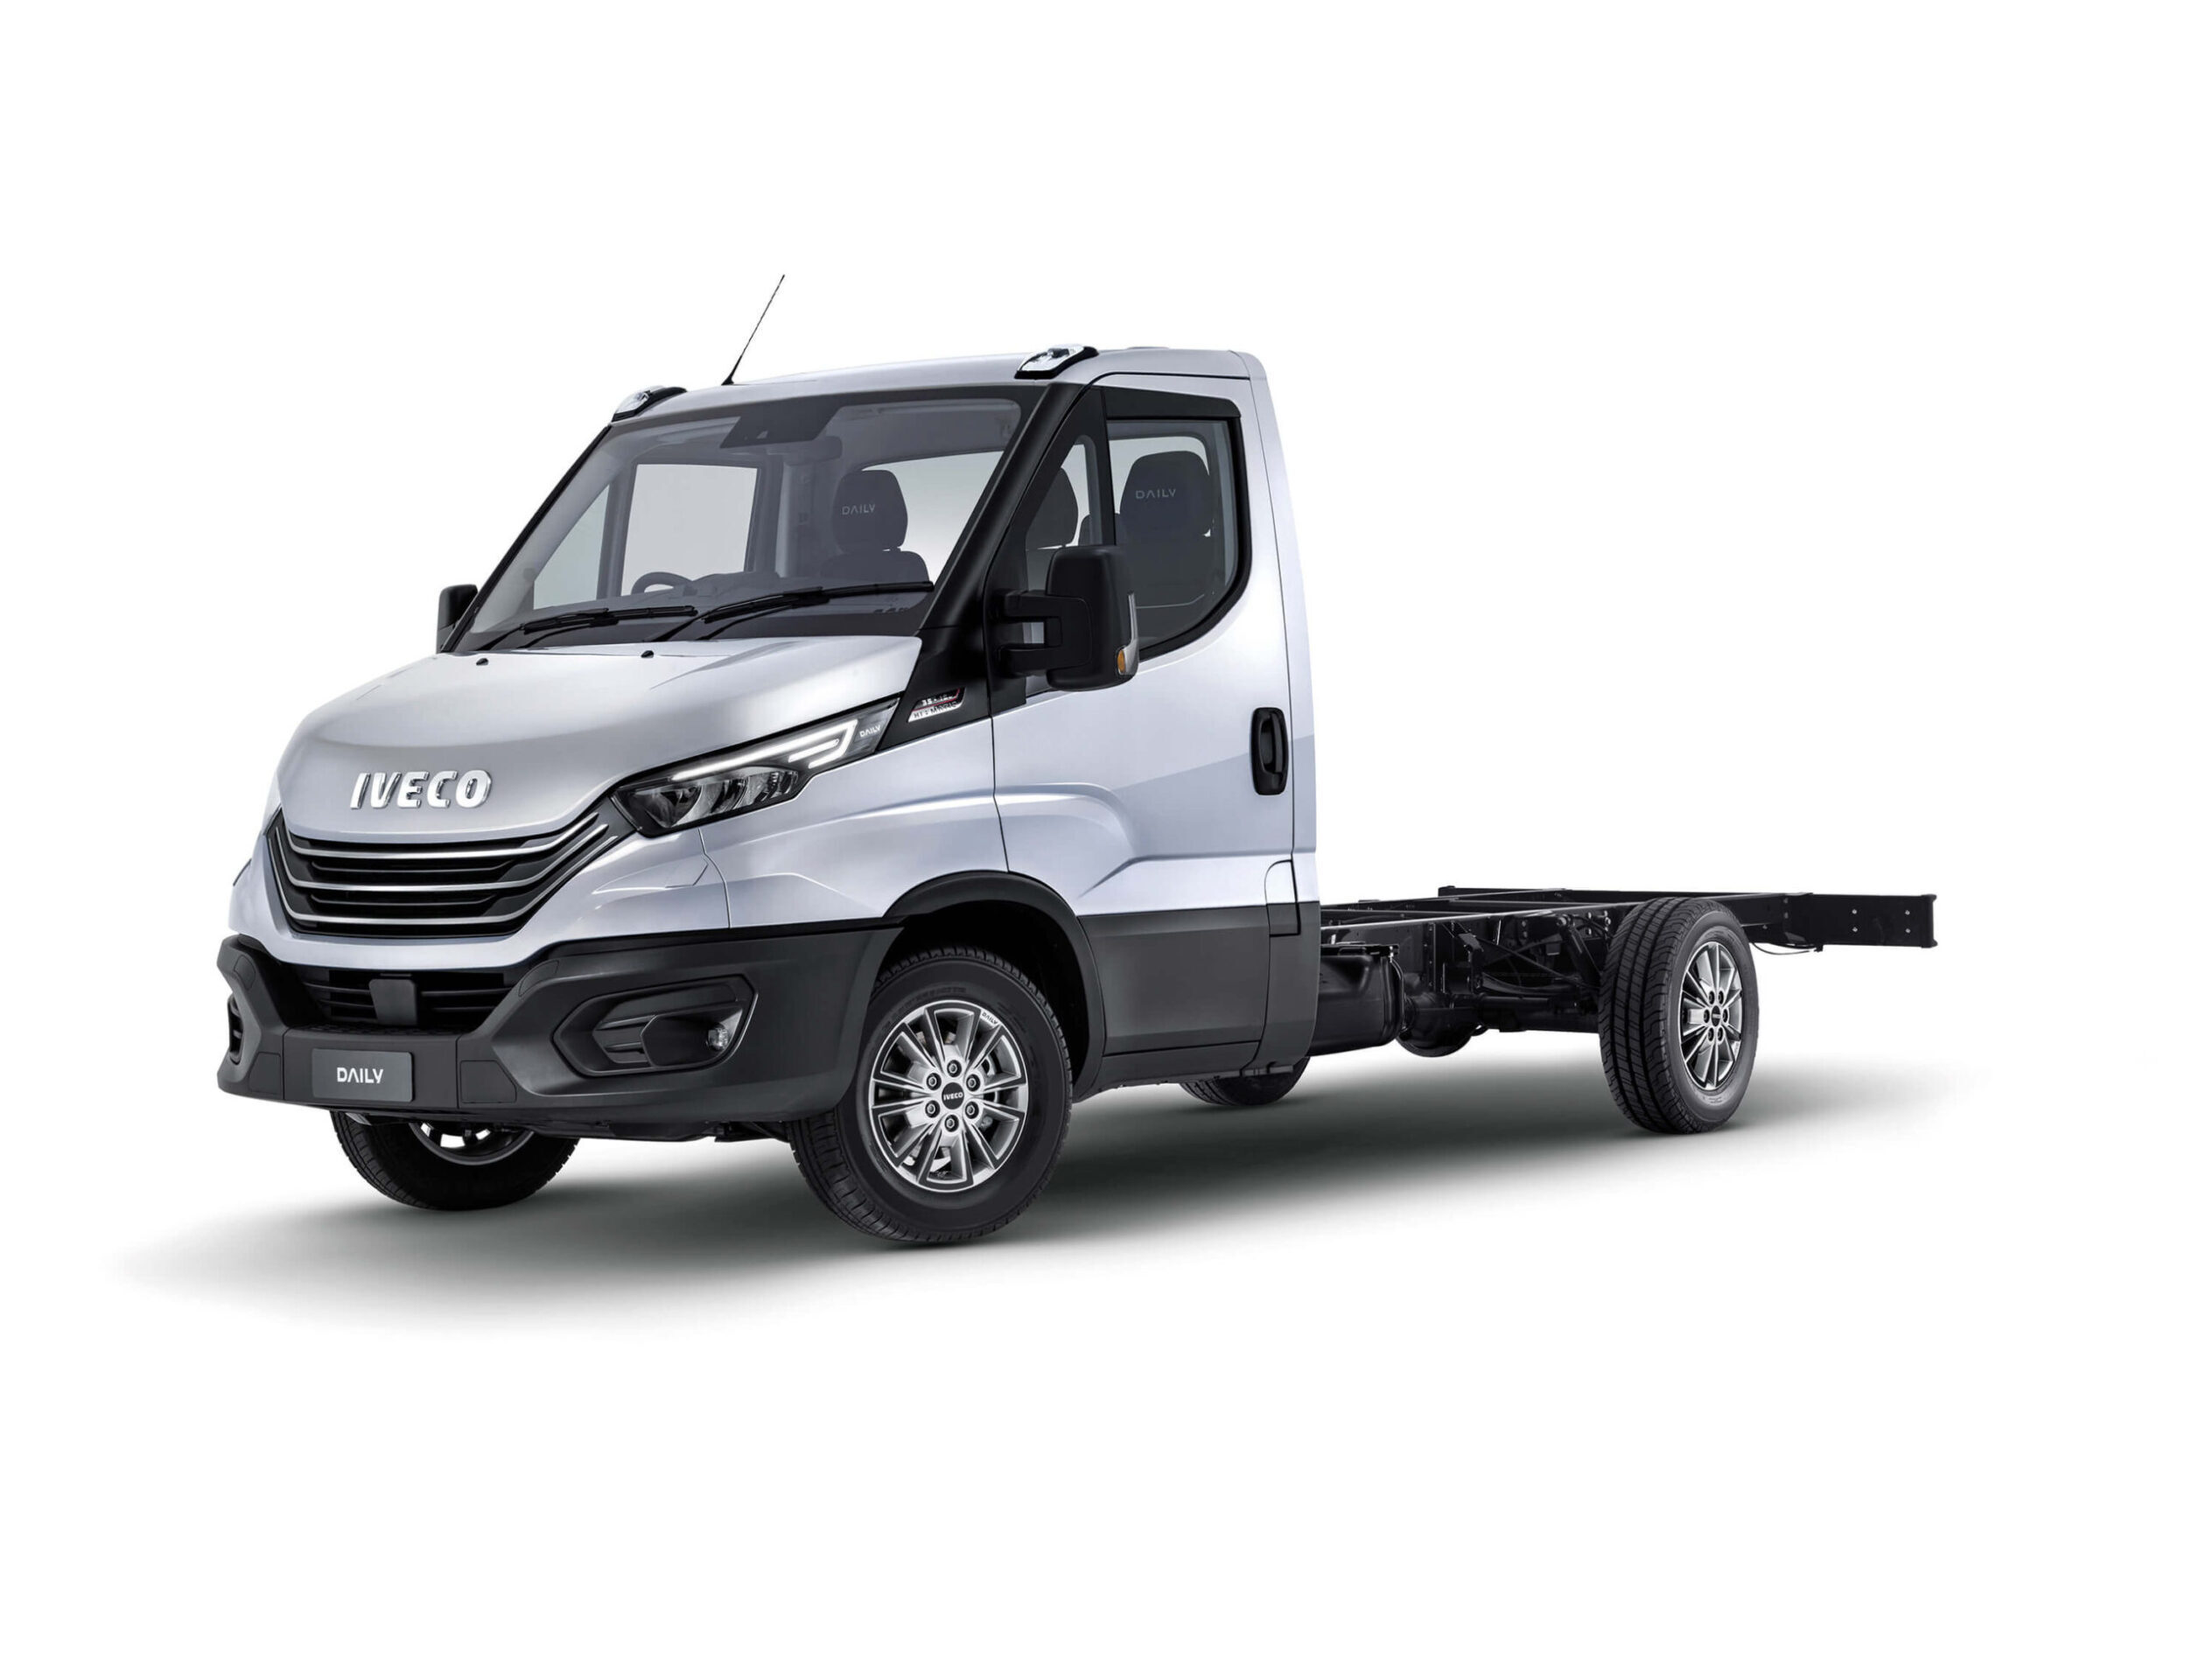 IVECO Daily Chassis - En varevogn fra IVECO 